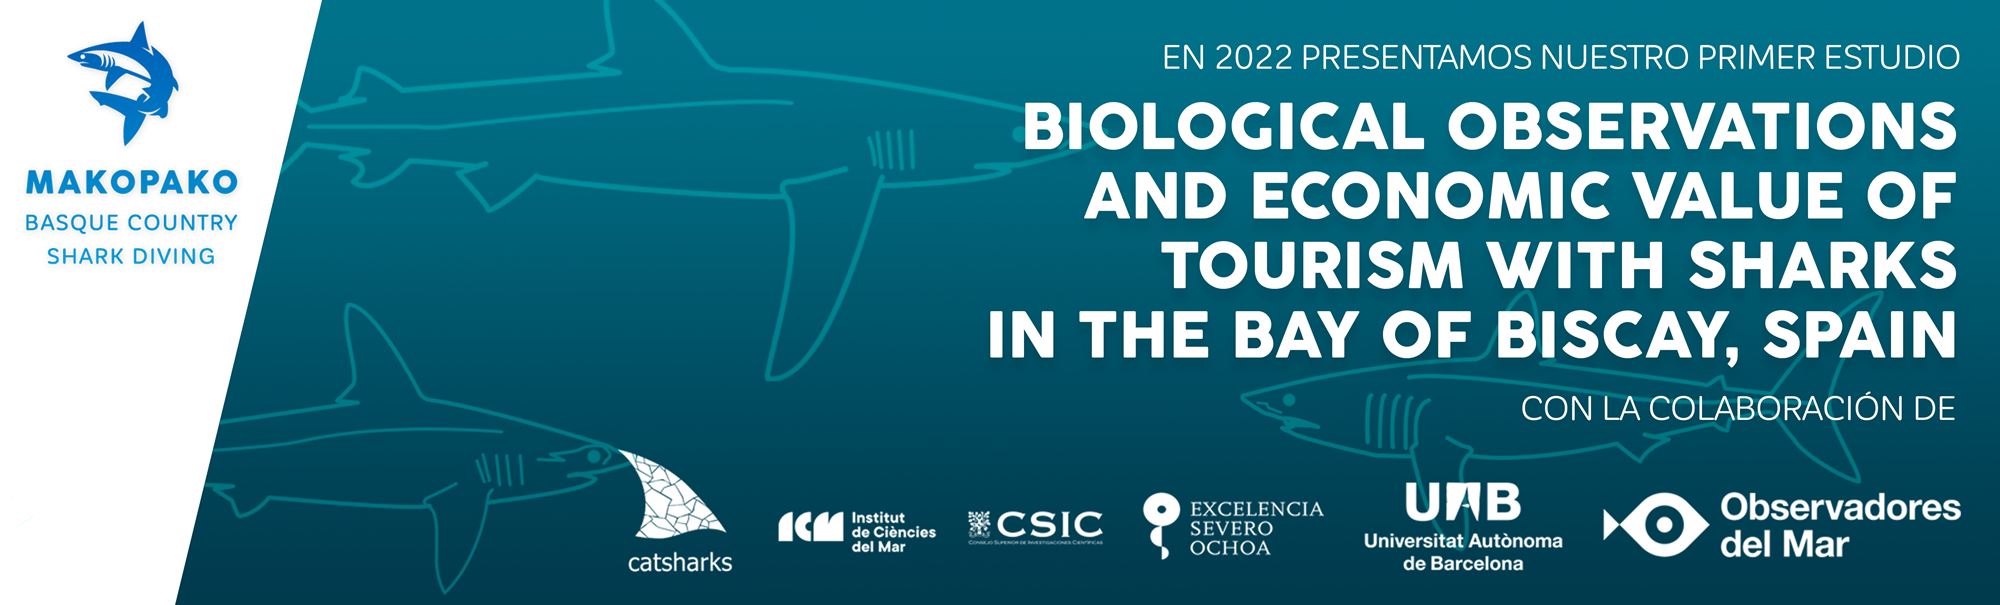 BIOLOGICAL OBSERVATIONS AND ECONOMIC VALUE OF SHARK TOURISM IN BAY OF BISCAY, SPAIN